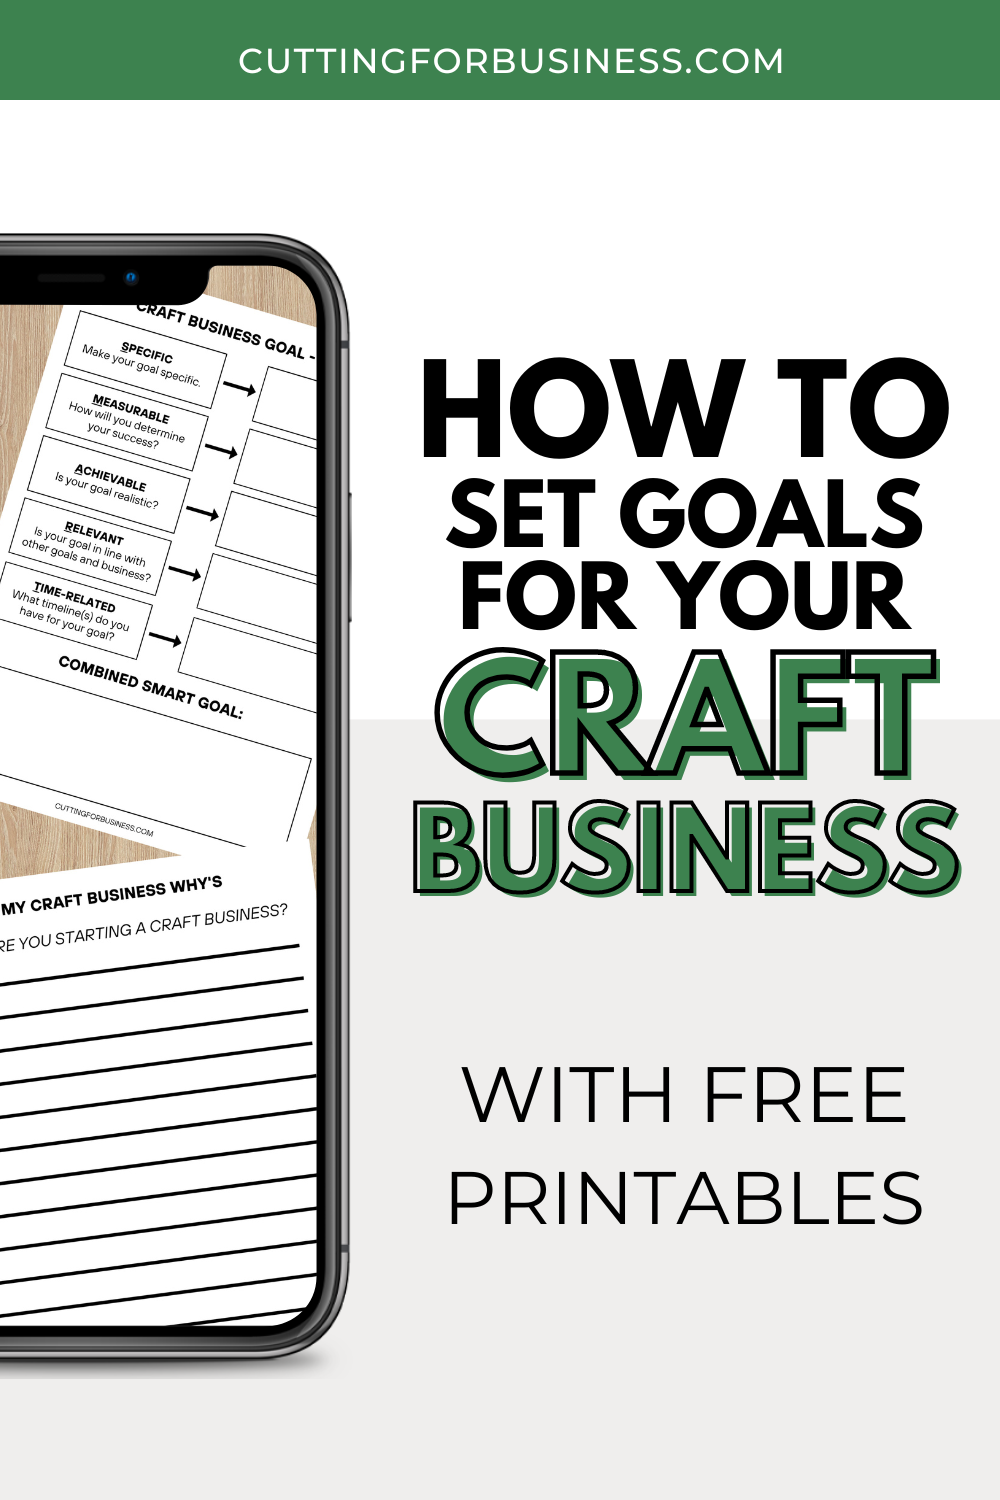 How to Set Goals for Your Craft Business - The SMART Way with Free Printables - cuttingforbusiness.com.